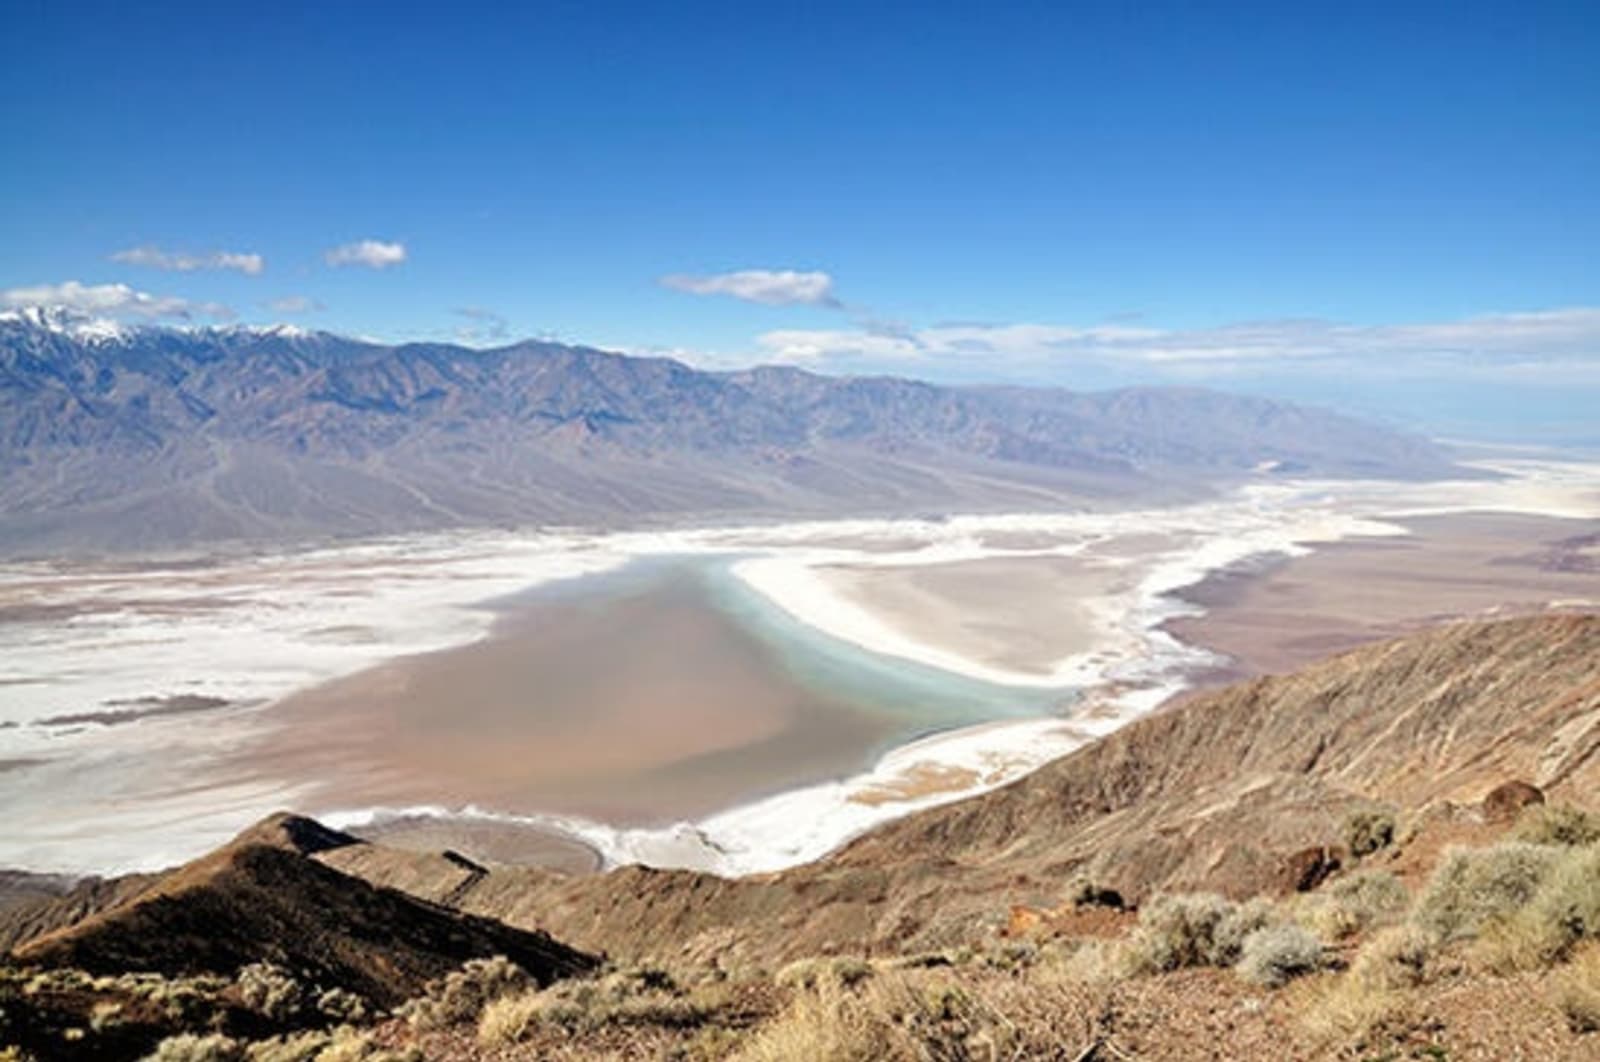 RS-Dantes-View-Death-Valley-USA-shutterstock_215300899.jpg